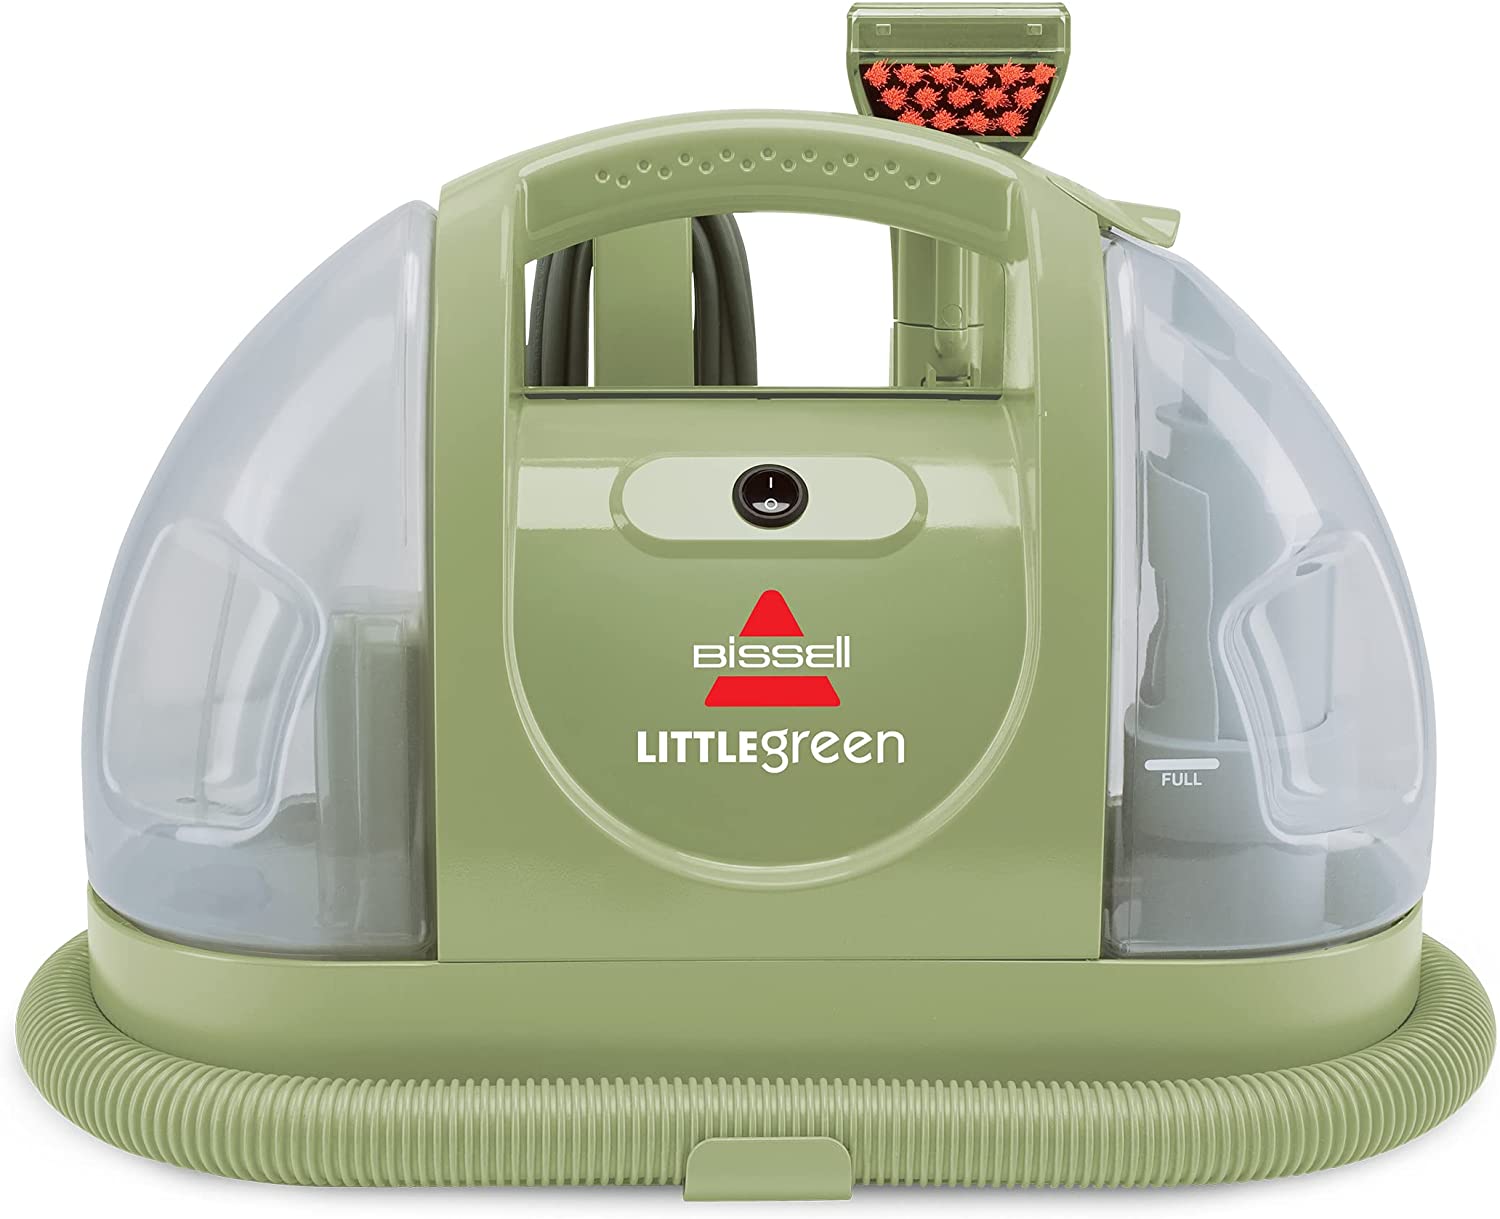 BISSELL Little 1400B Multi-Purpose Portable Carpet and Upholstery Cleaner - Green